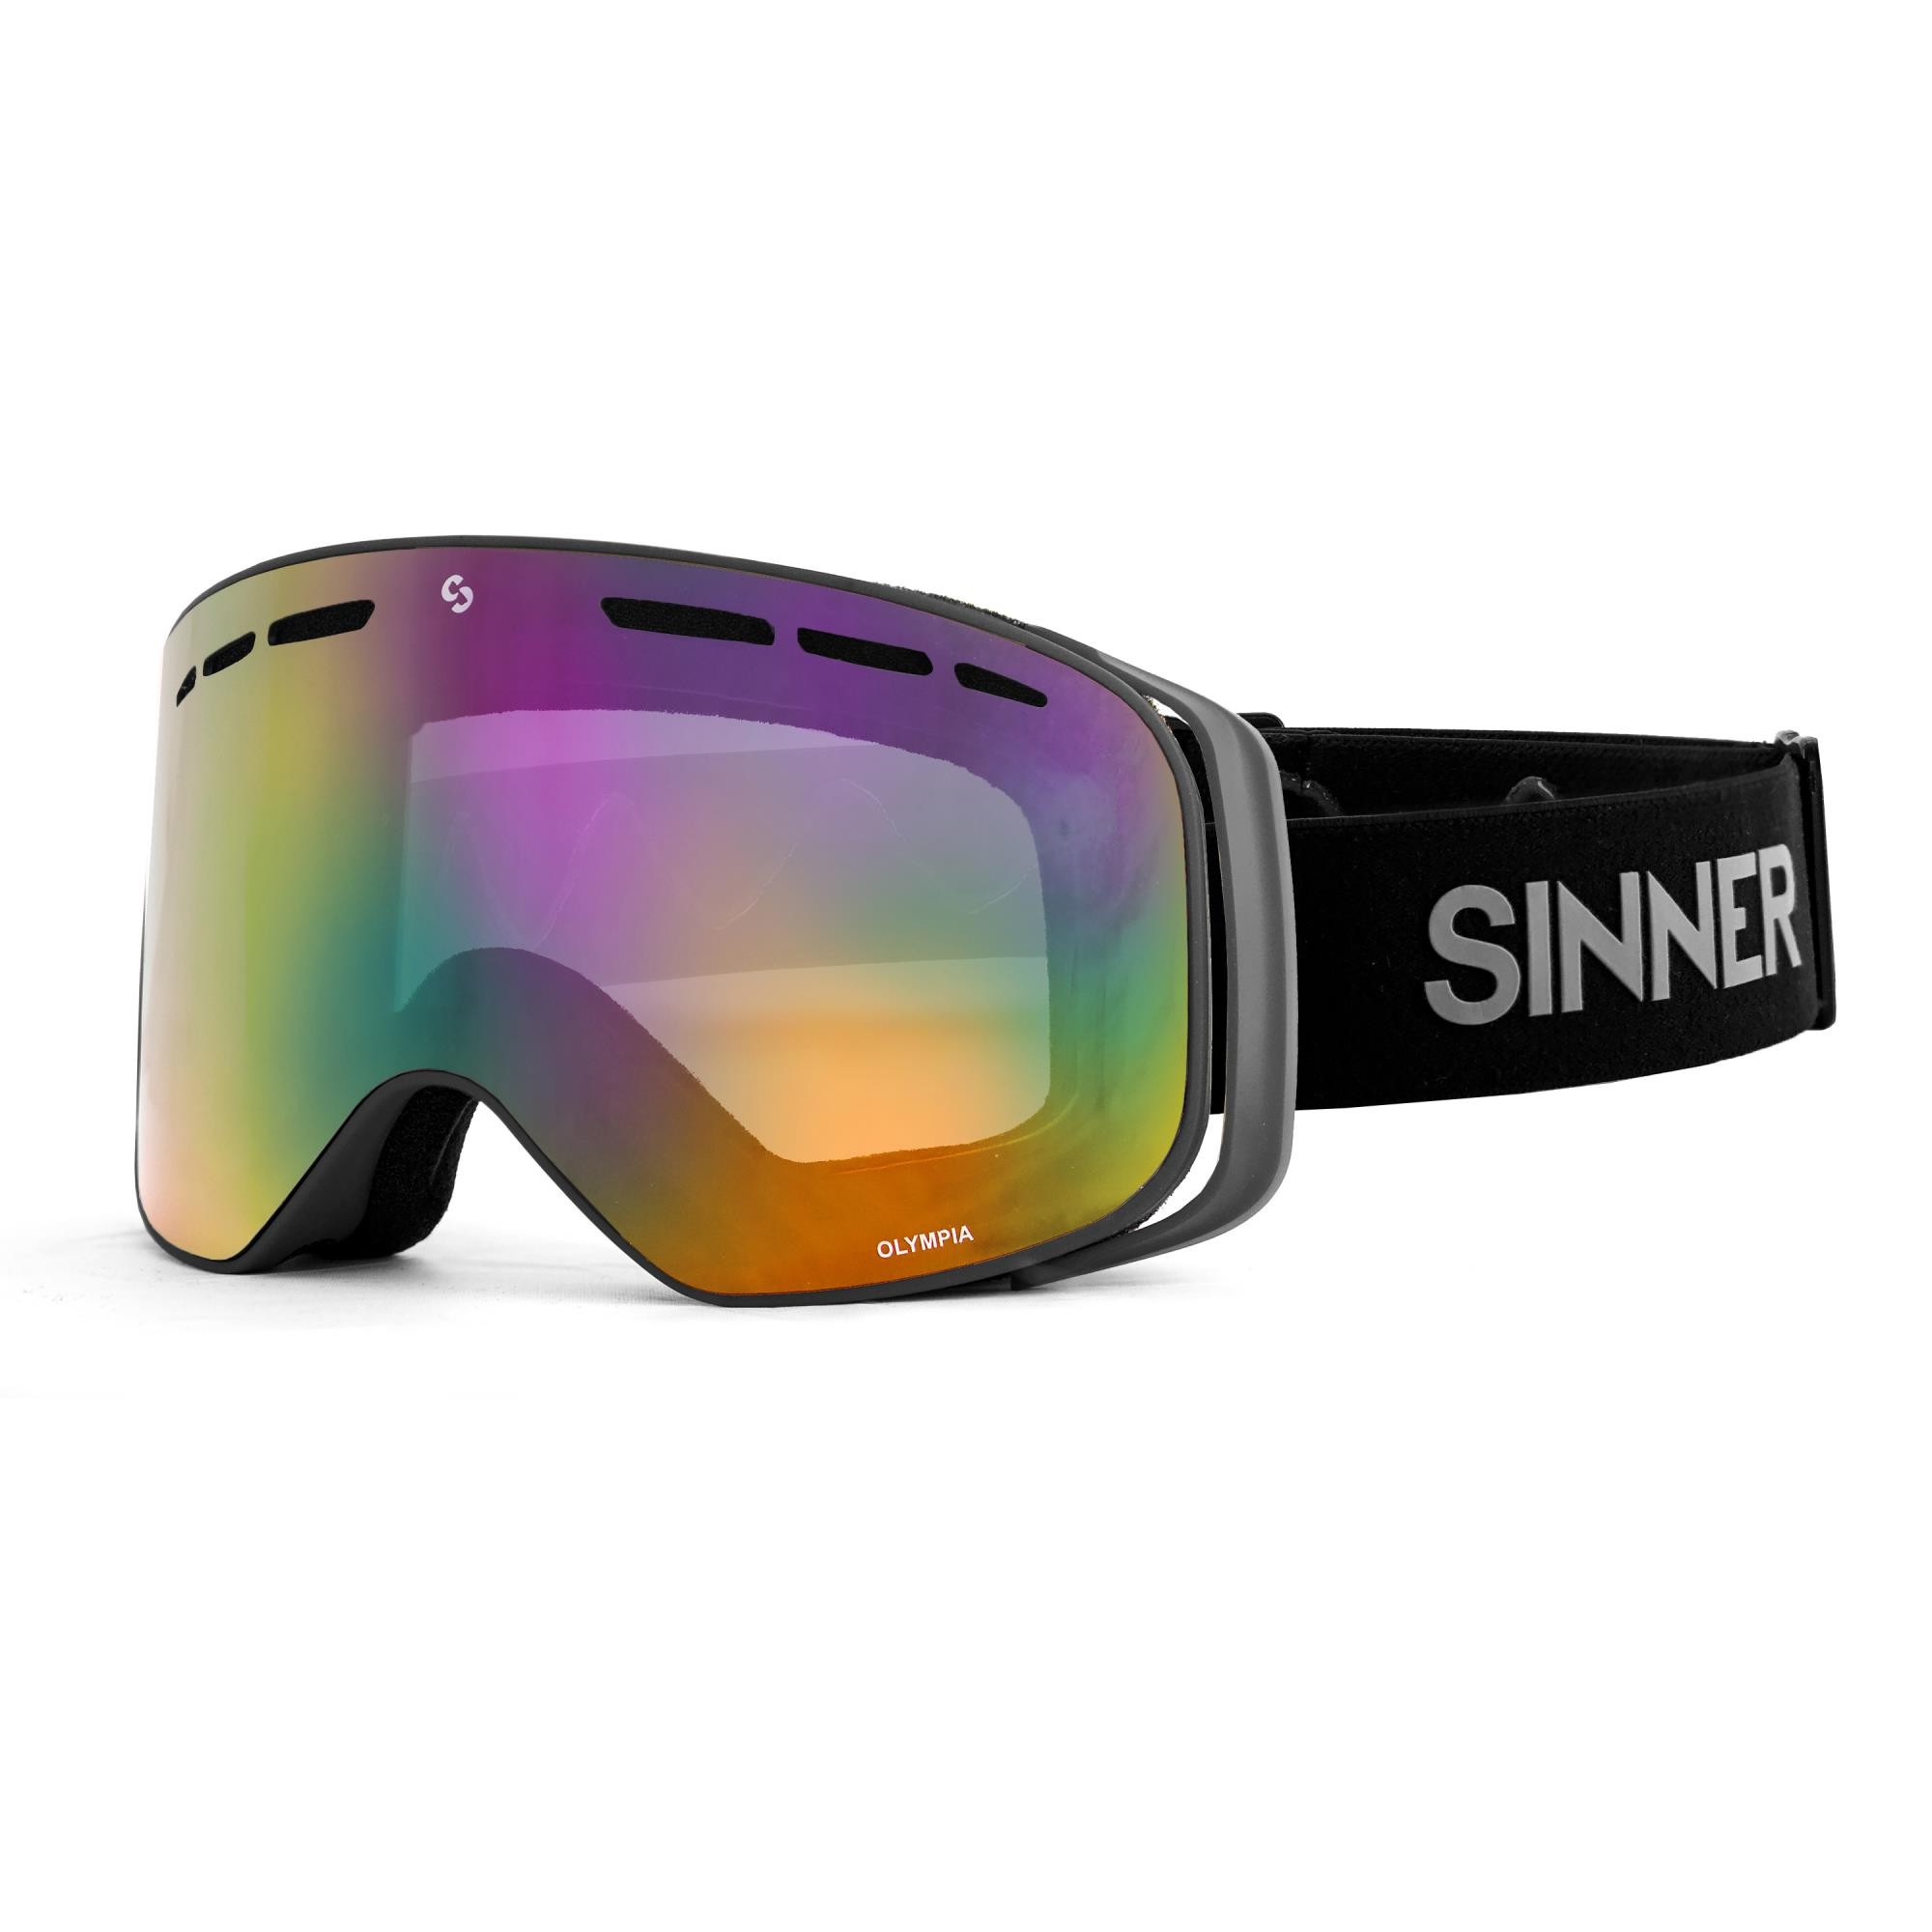 SINNER - OLYMPIA SKIBRIL - Mat Donkergrijs - Unisex - Maat One Size